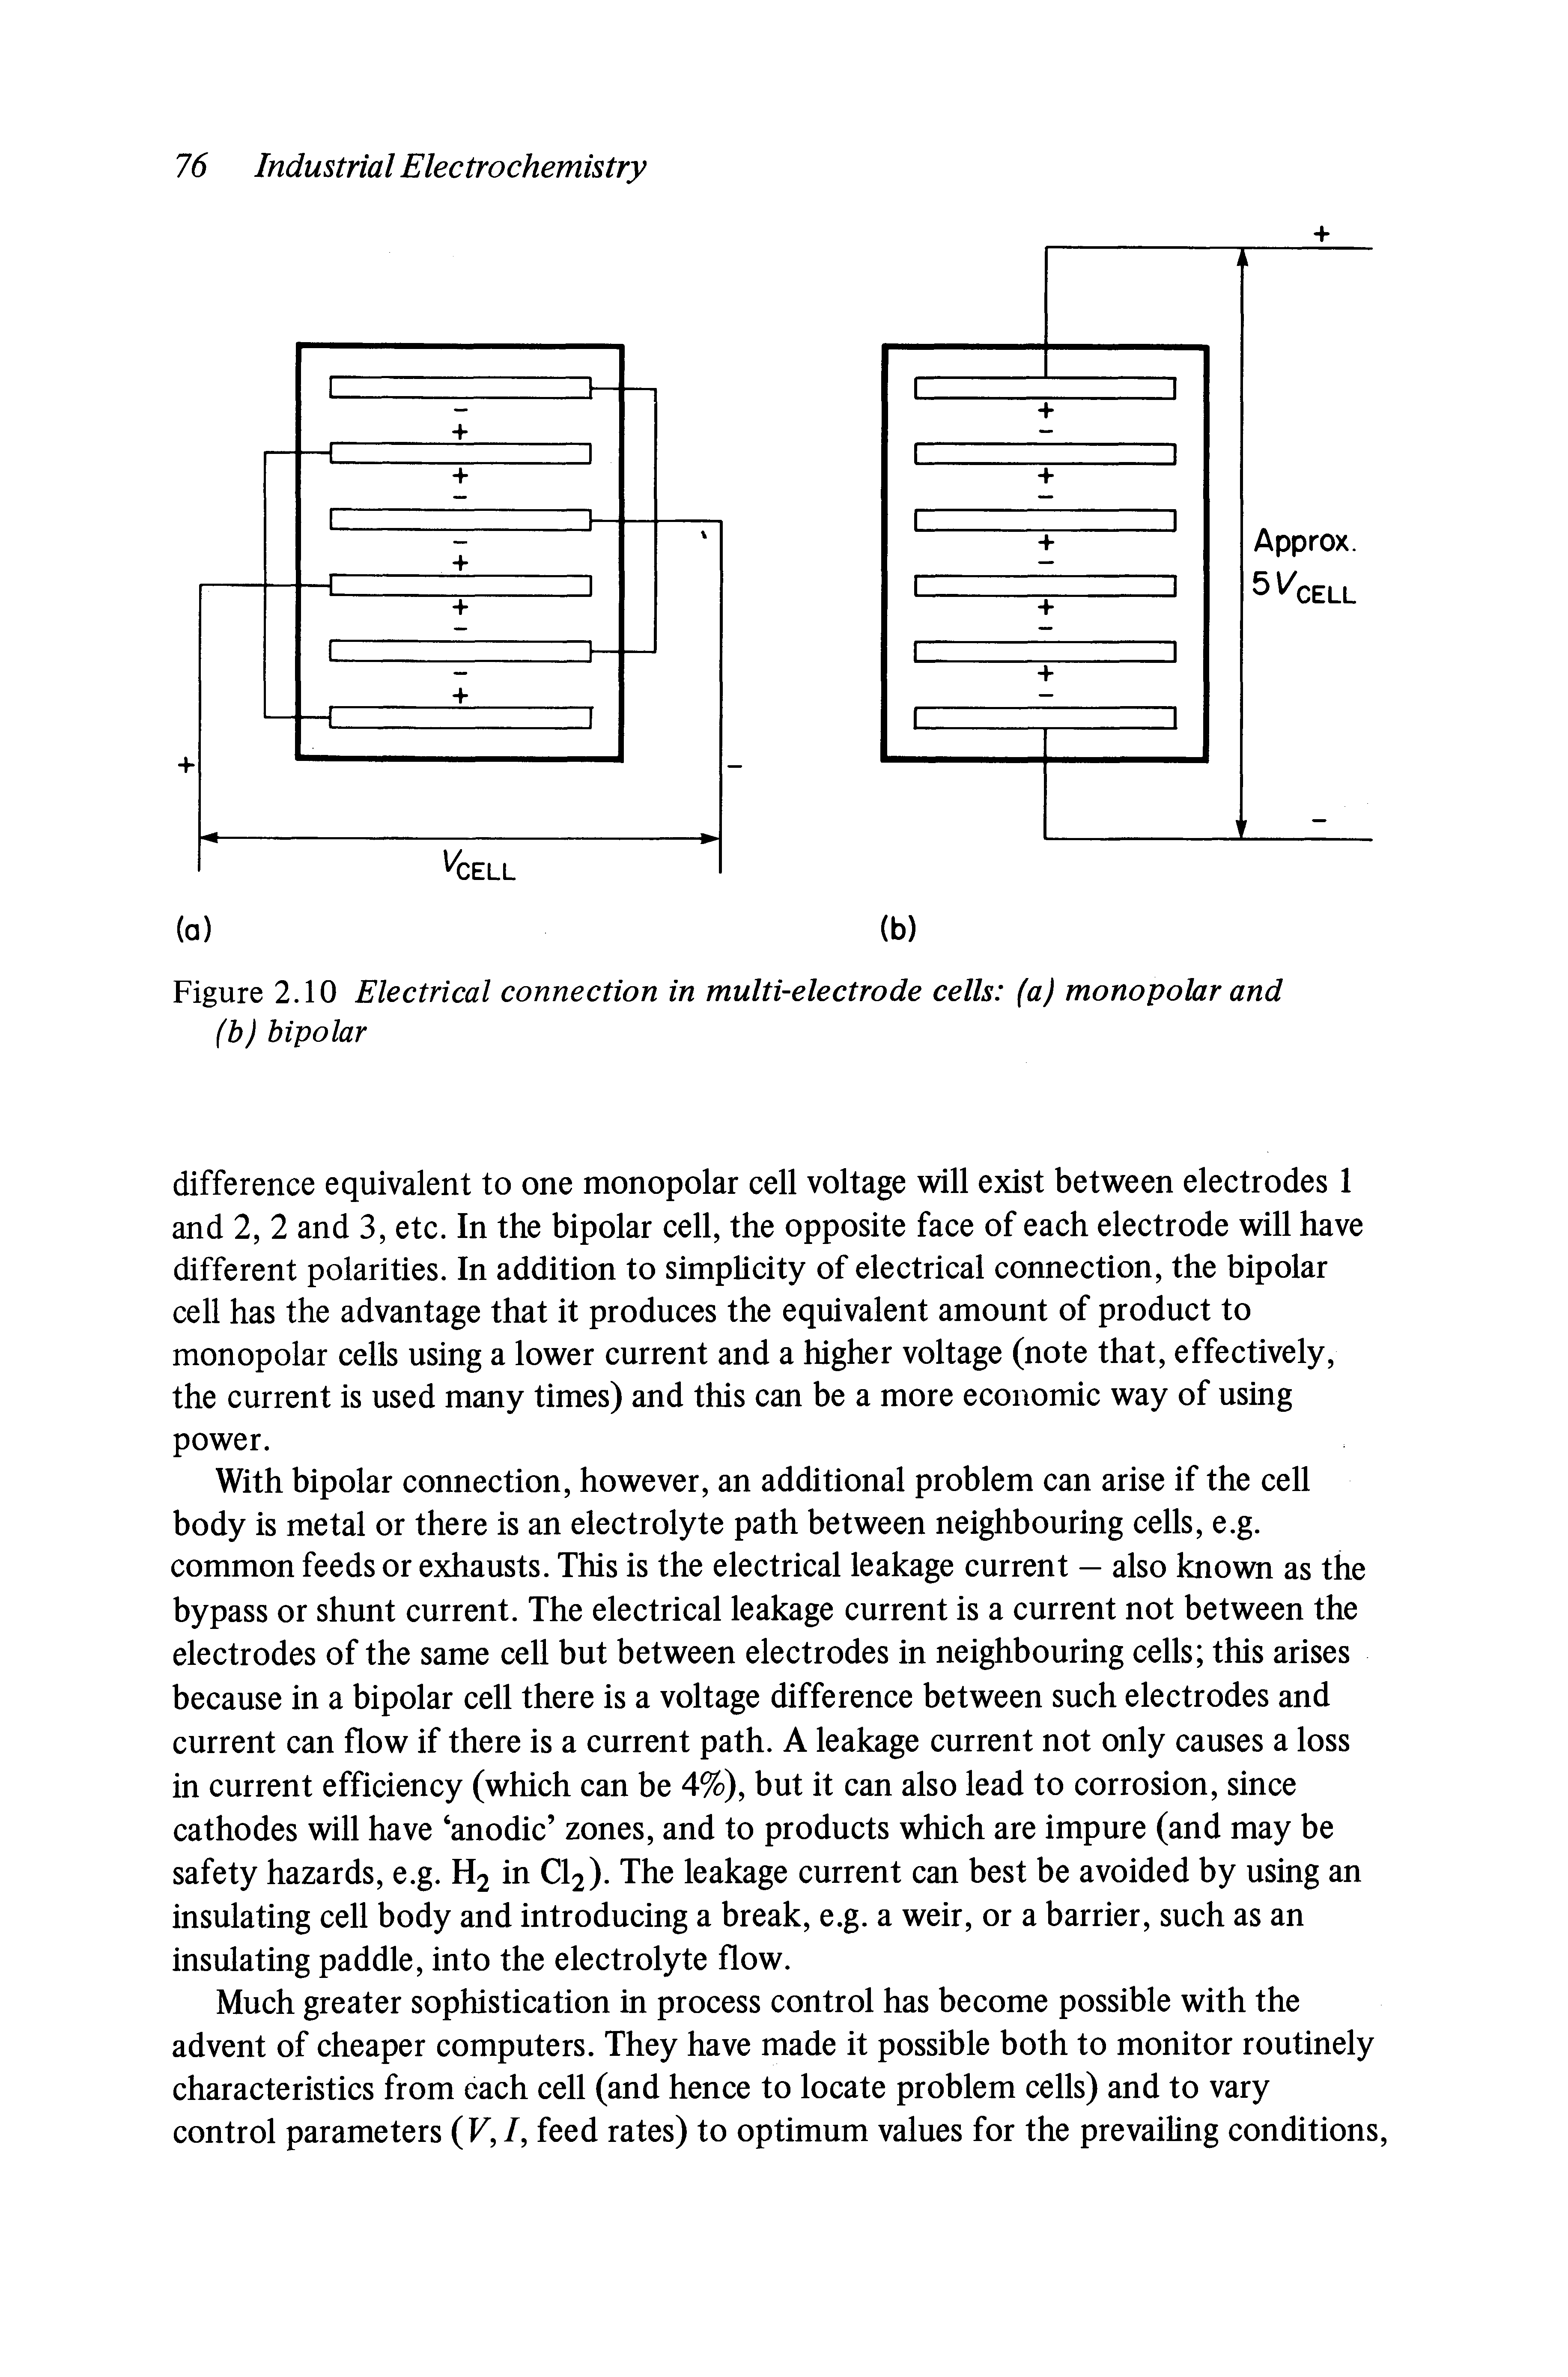 Figure 2.10 Electrical connection in multi-electrode cells (a) monopolar and...